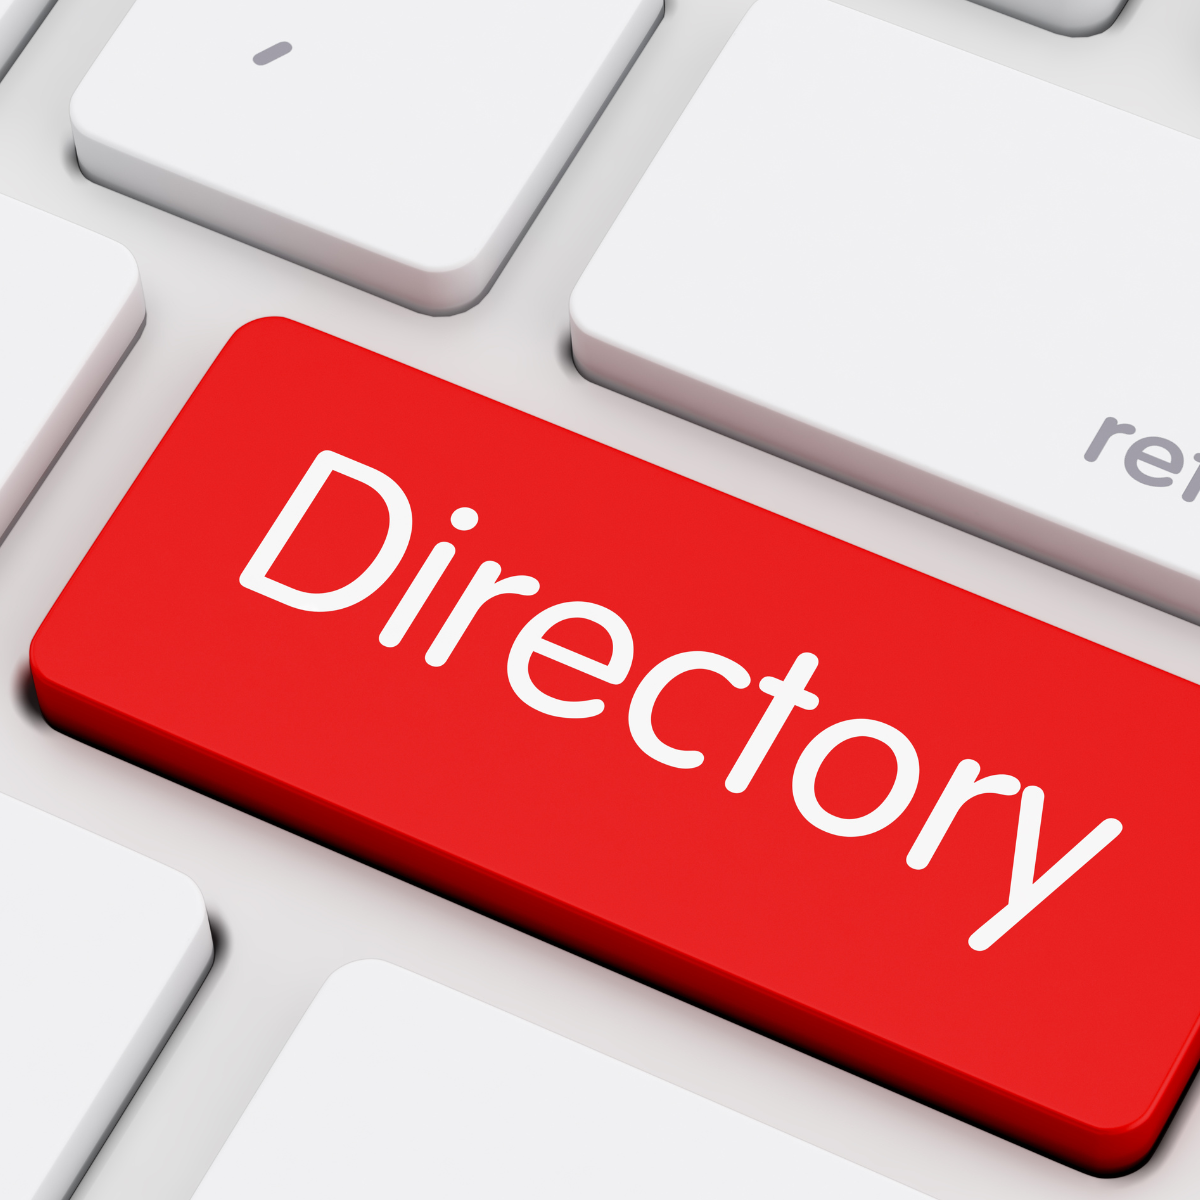 Business directory website & list your business